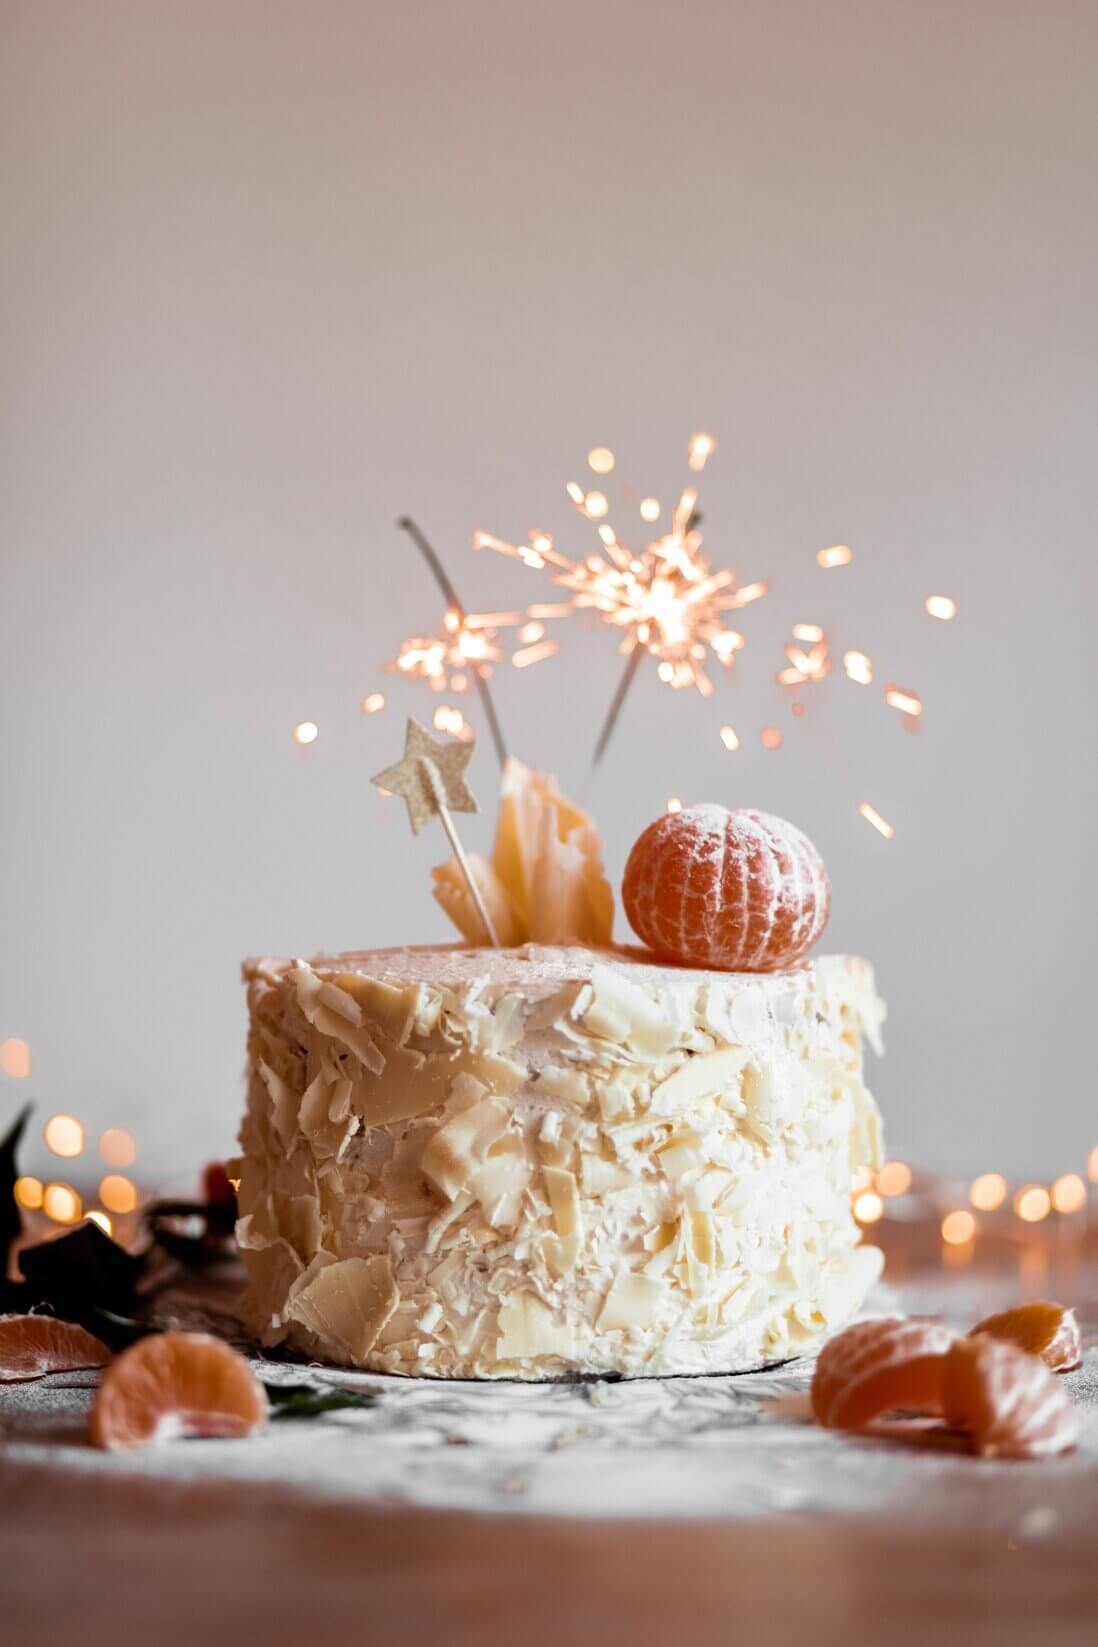 How to Set Up a Cake & Candle Firework for the New Year